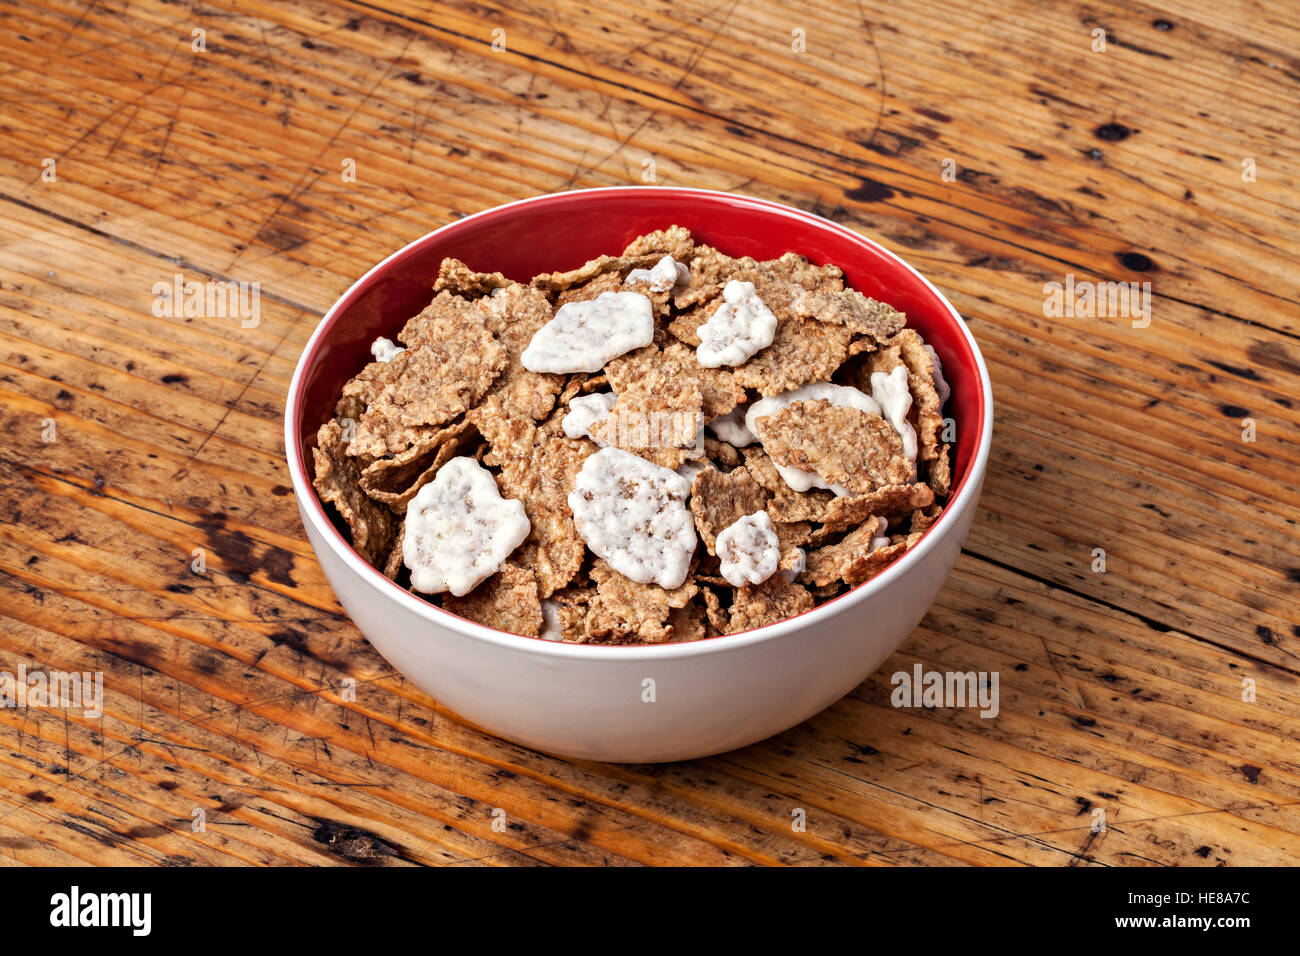 Image of bowl muesli on a wooden table Stock Photo